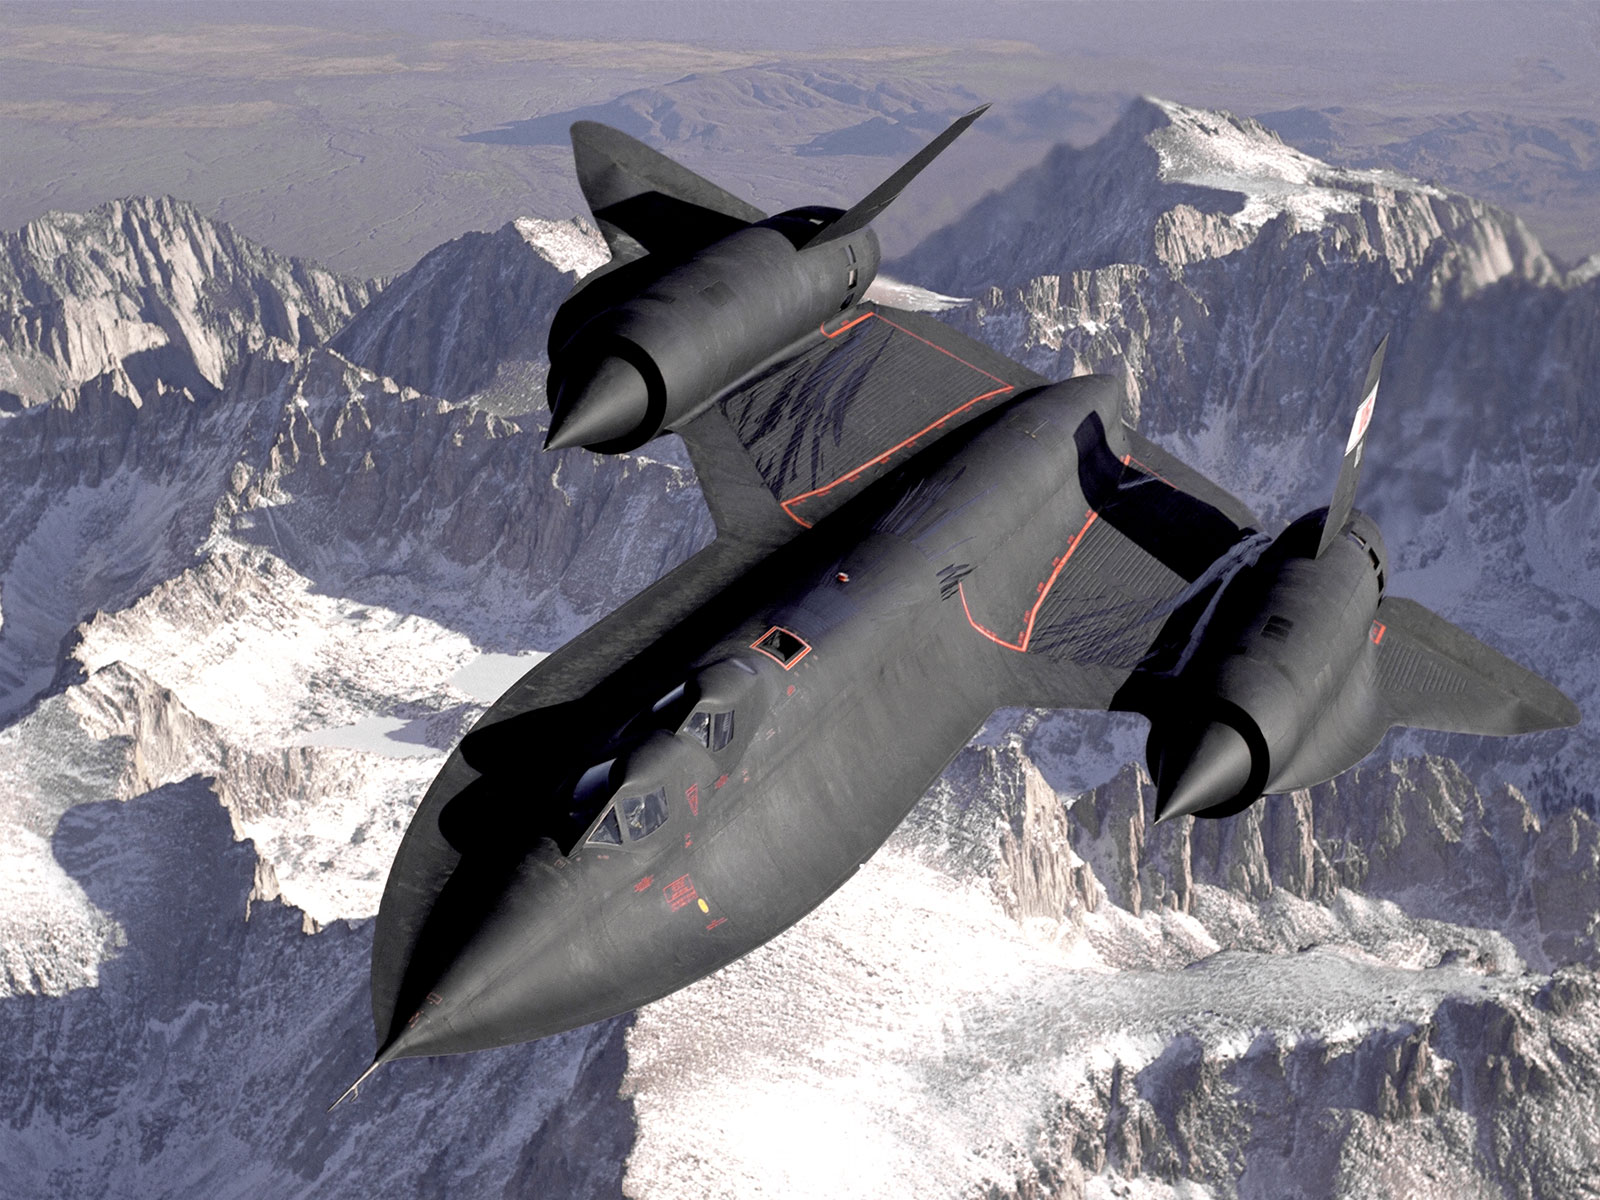 Download HQ Stealth aircraft above mountains Military Airplanes wallpaper / 1600x1200